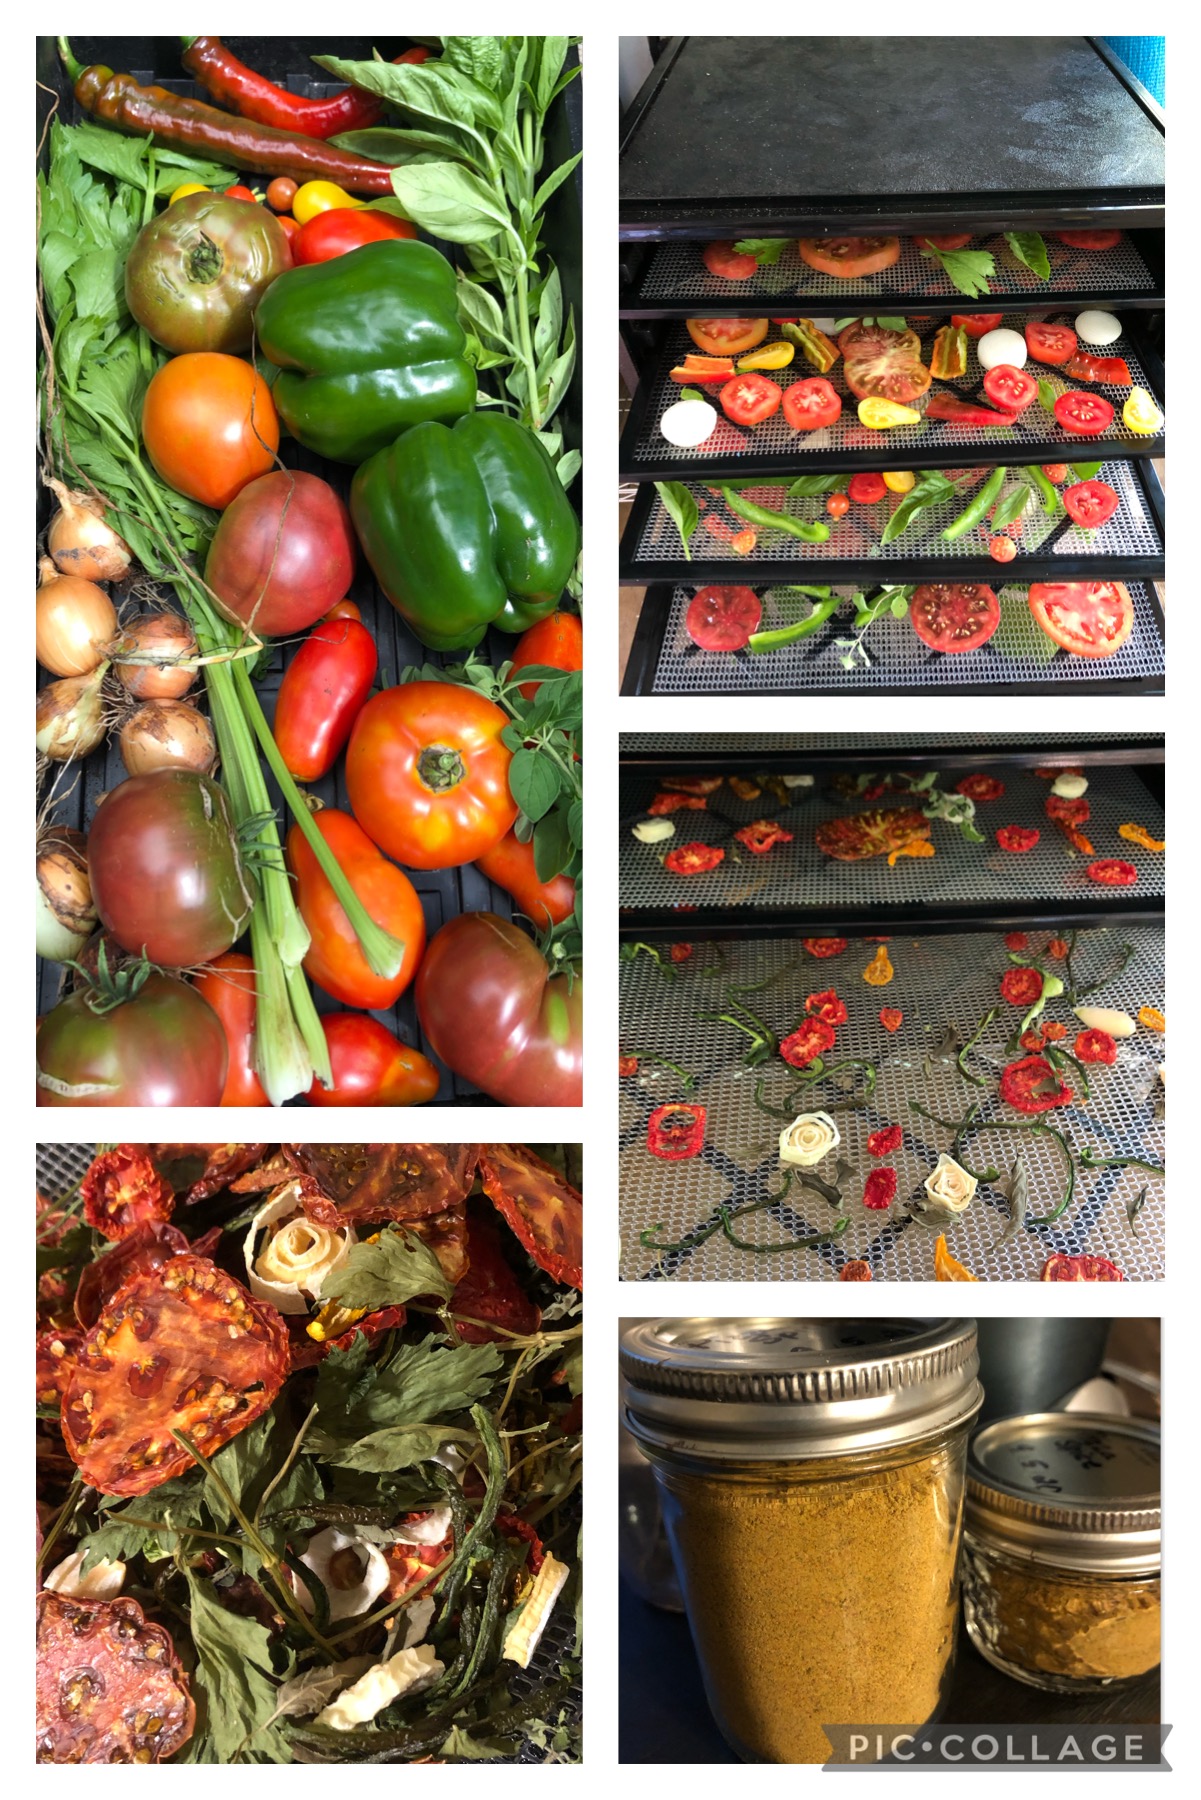 Image shows steps in turning fresh vegetables into canned spices.